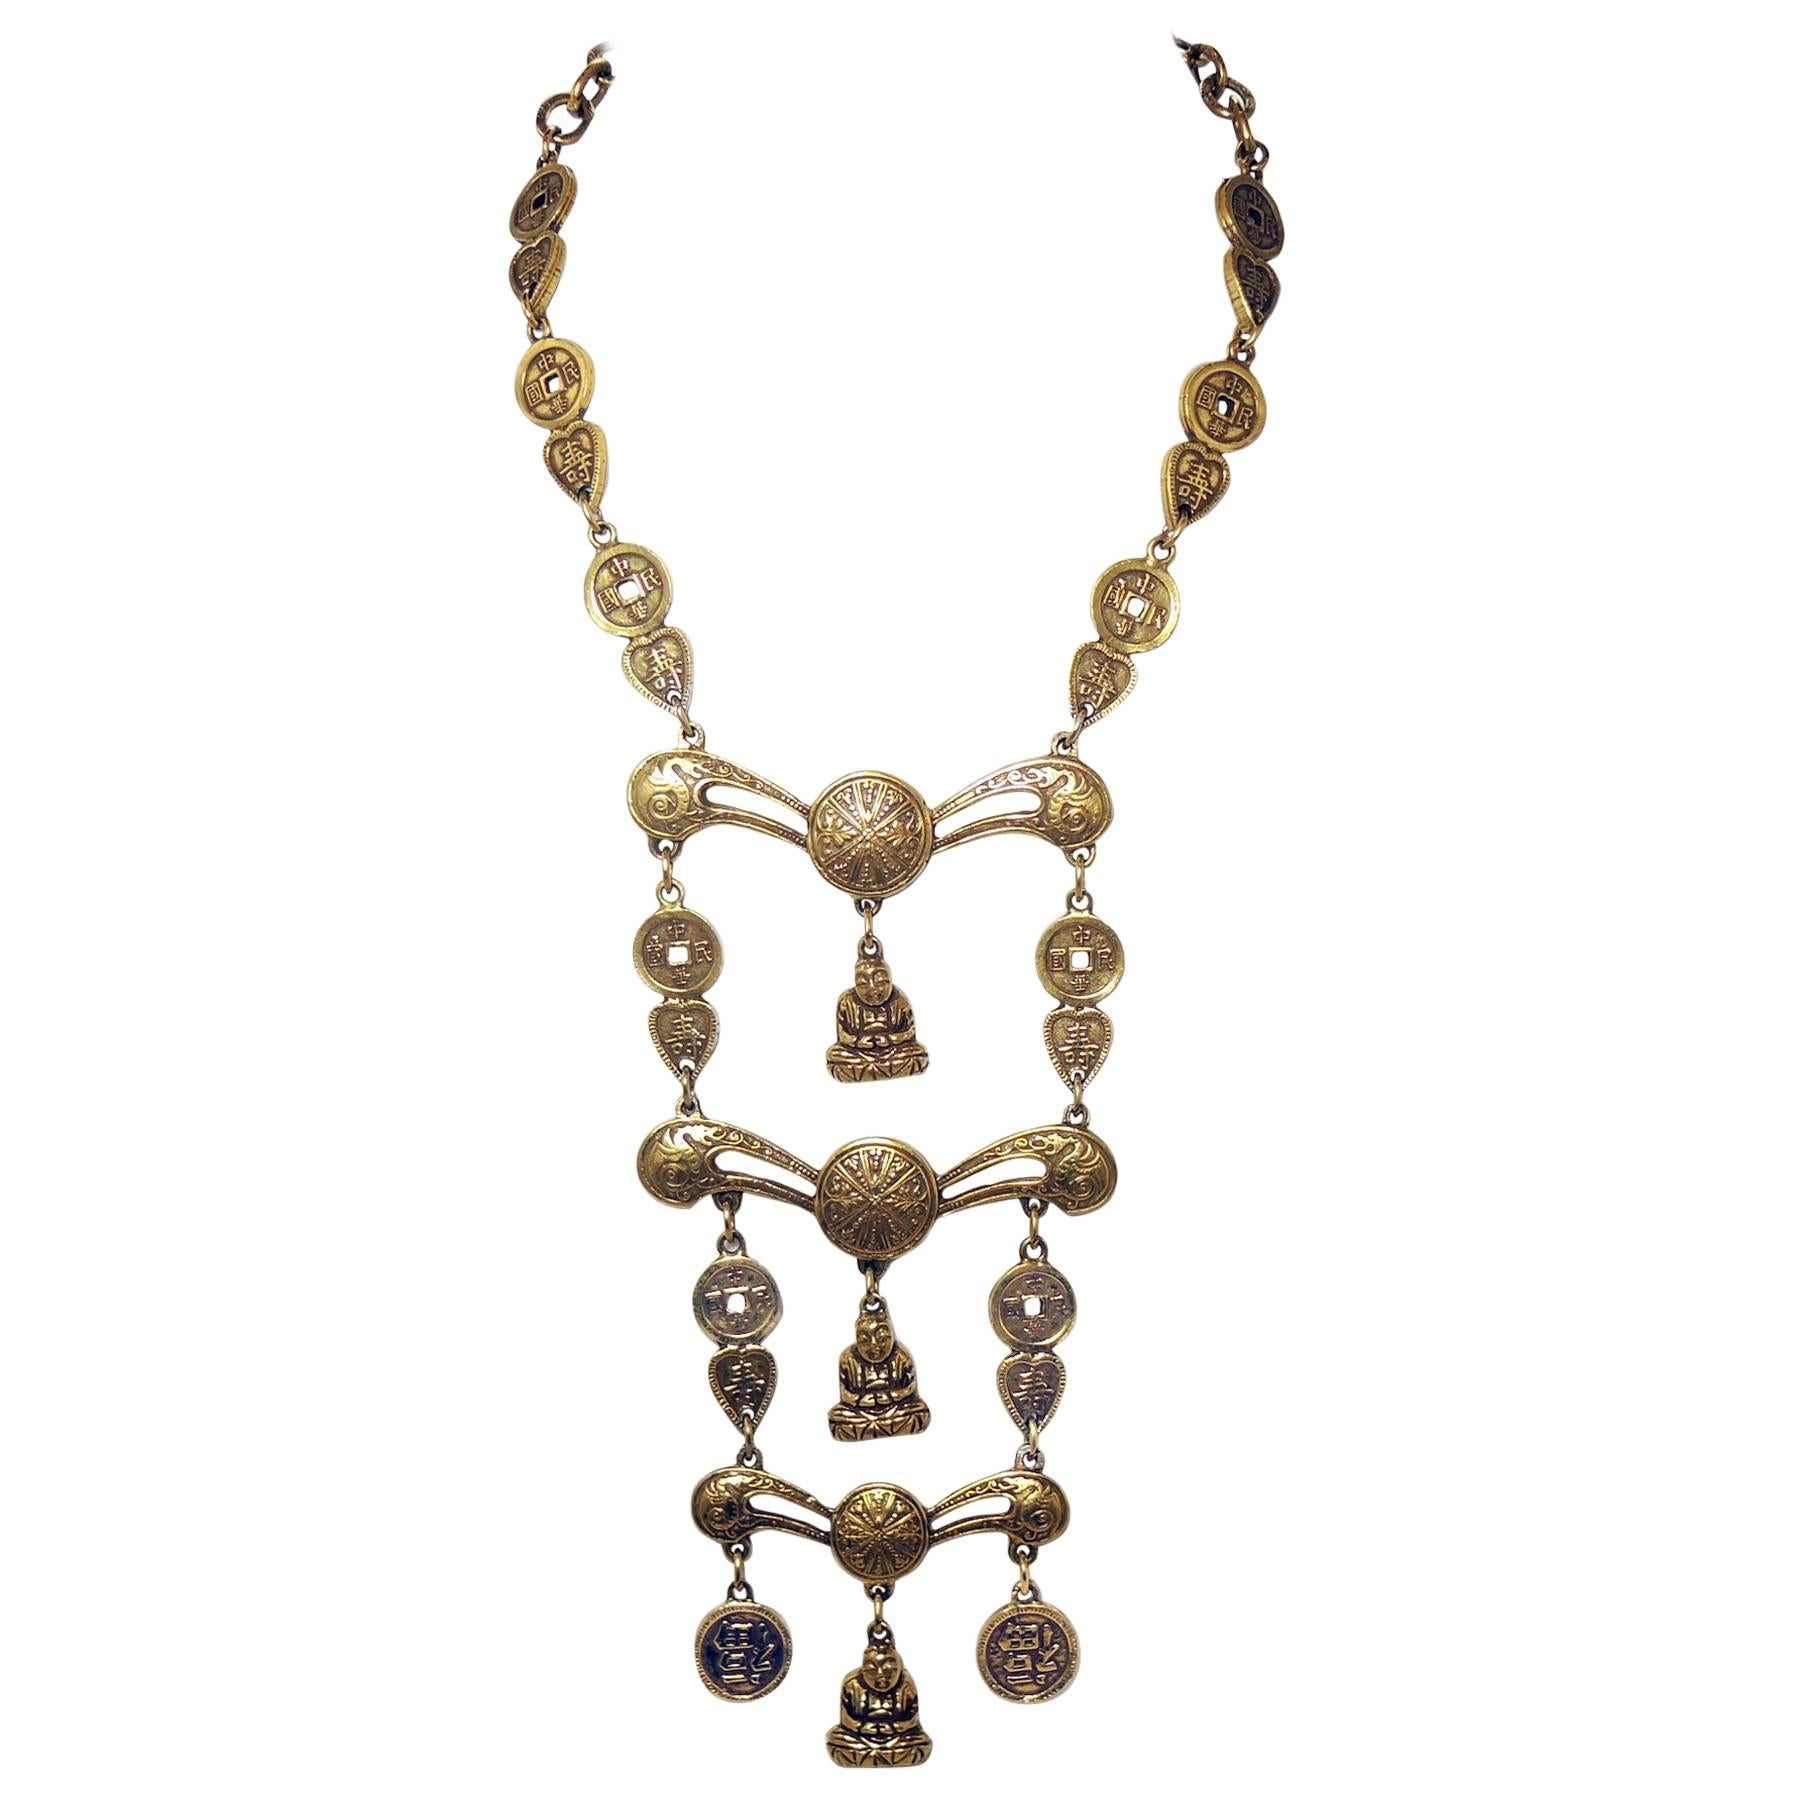 Accessocraft NYC Vintage Tiered Buddha Asian Necklace, 1950s 